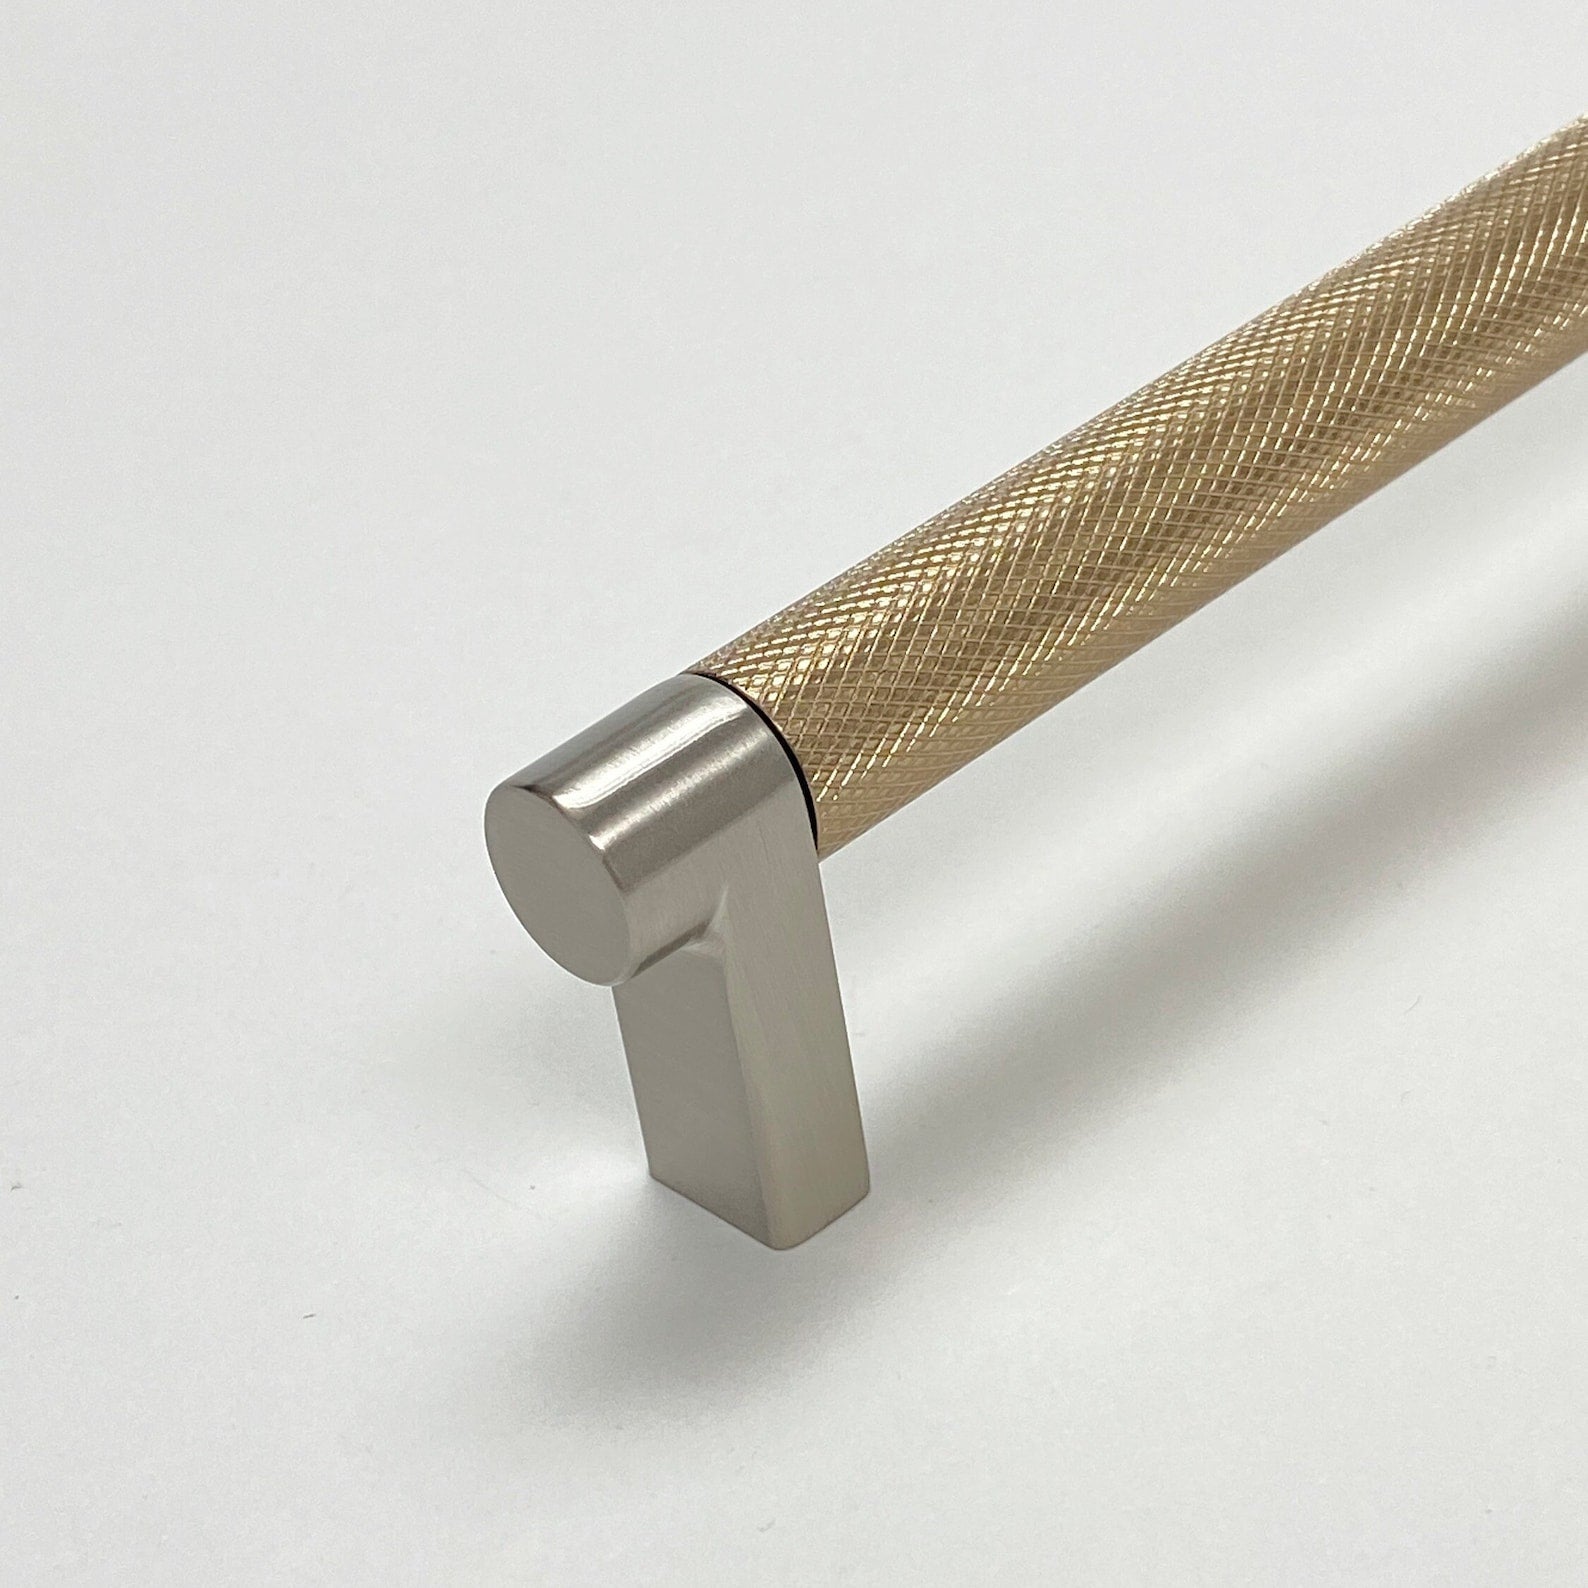 Knurled "Converse" Brushed Nickel and Champagne Bronze Dual-Finish Knobs and Pulls - Industry Hardware